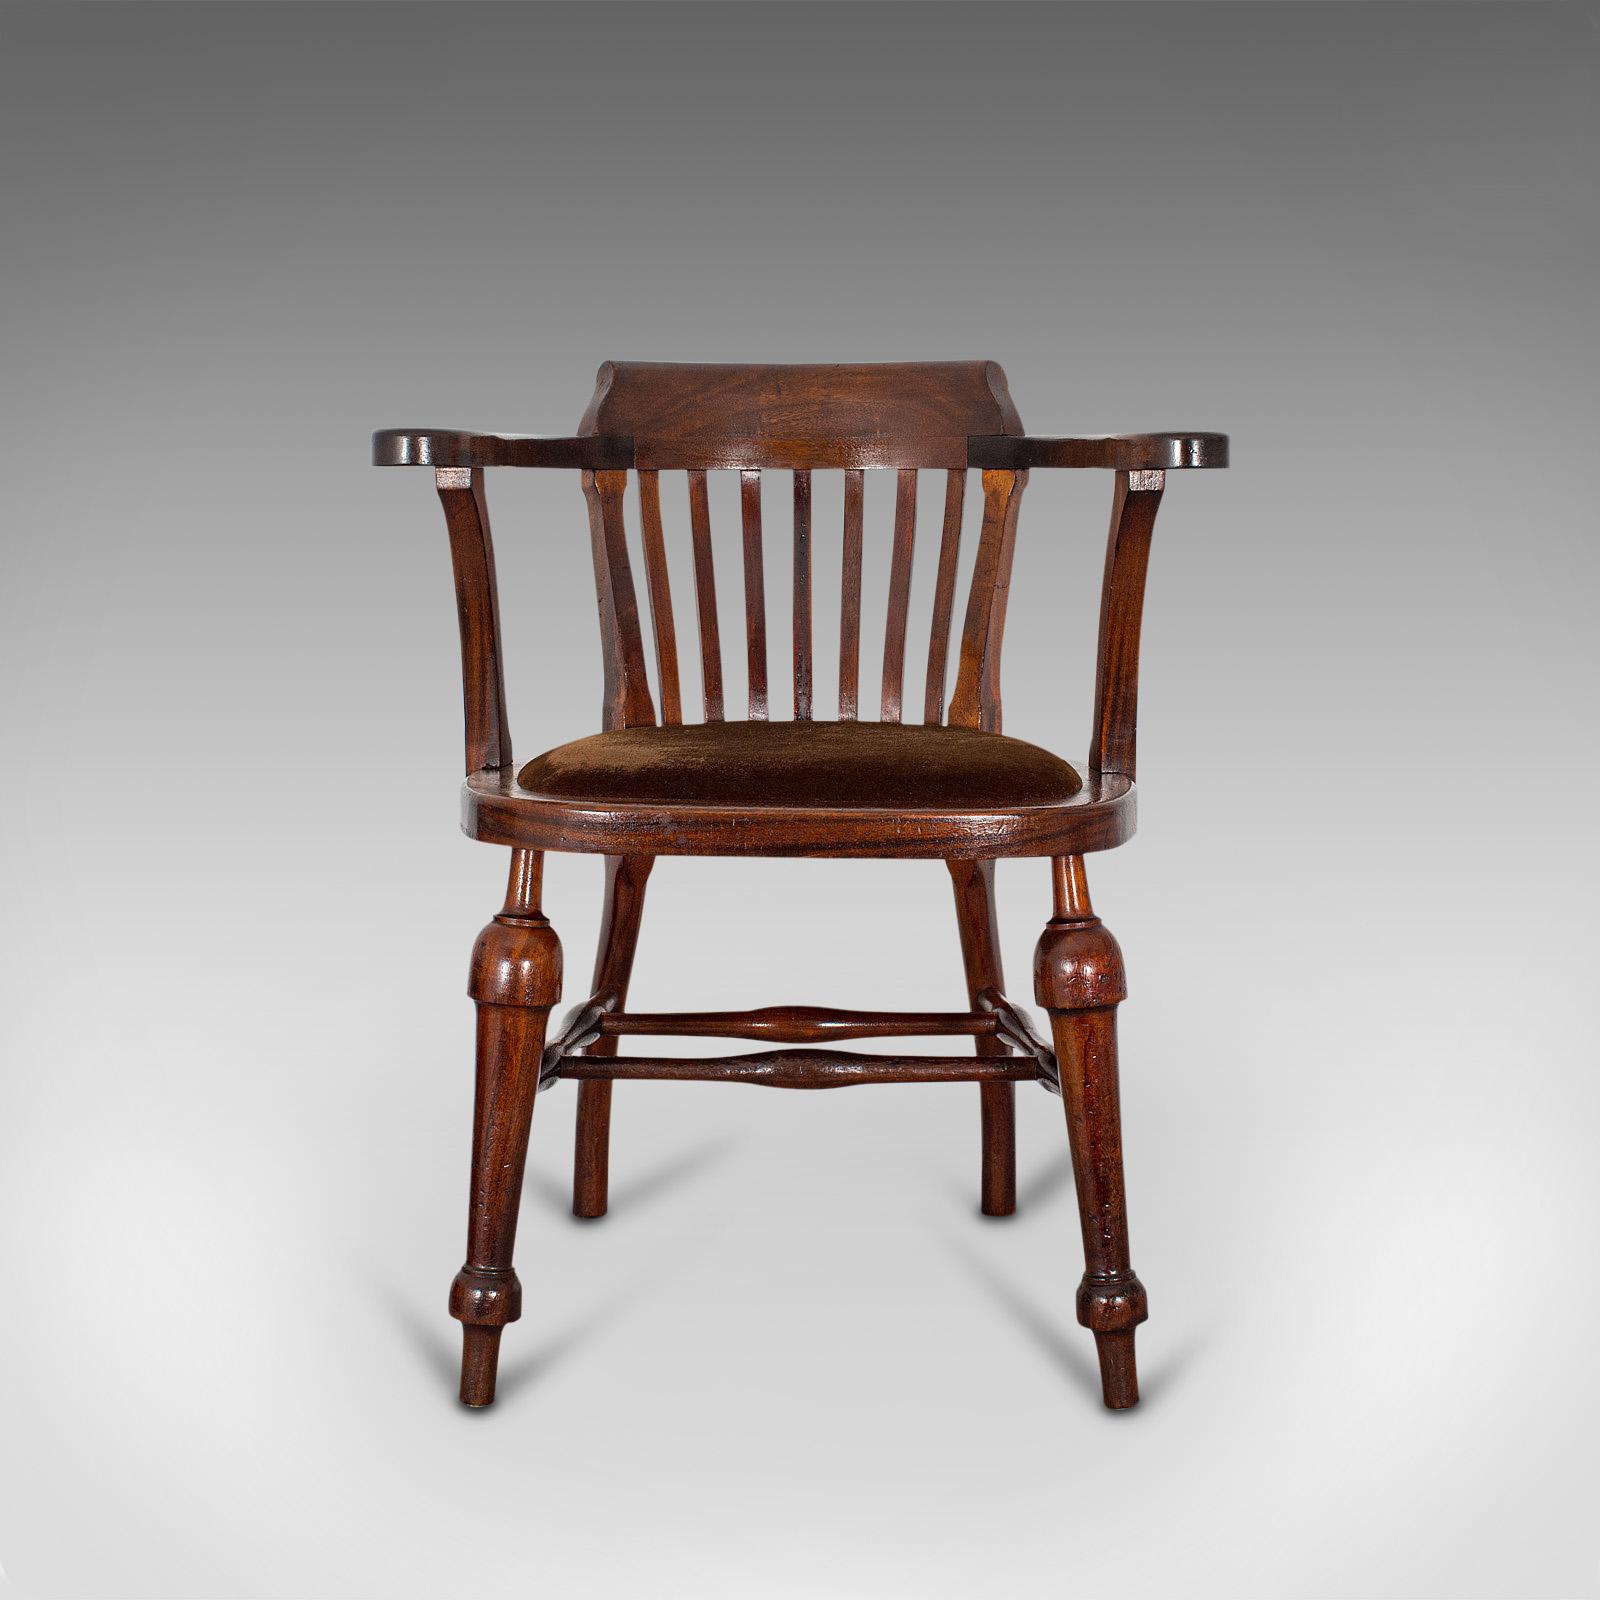 This is an antique captain's chair. An English, mahogany armchair with drop-in seat, dating to the Edwardian period, circa 1910.

An attractive armchair with serpentine form
Displaying a desirable aged patina
Mahogany offers fine color and grain